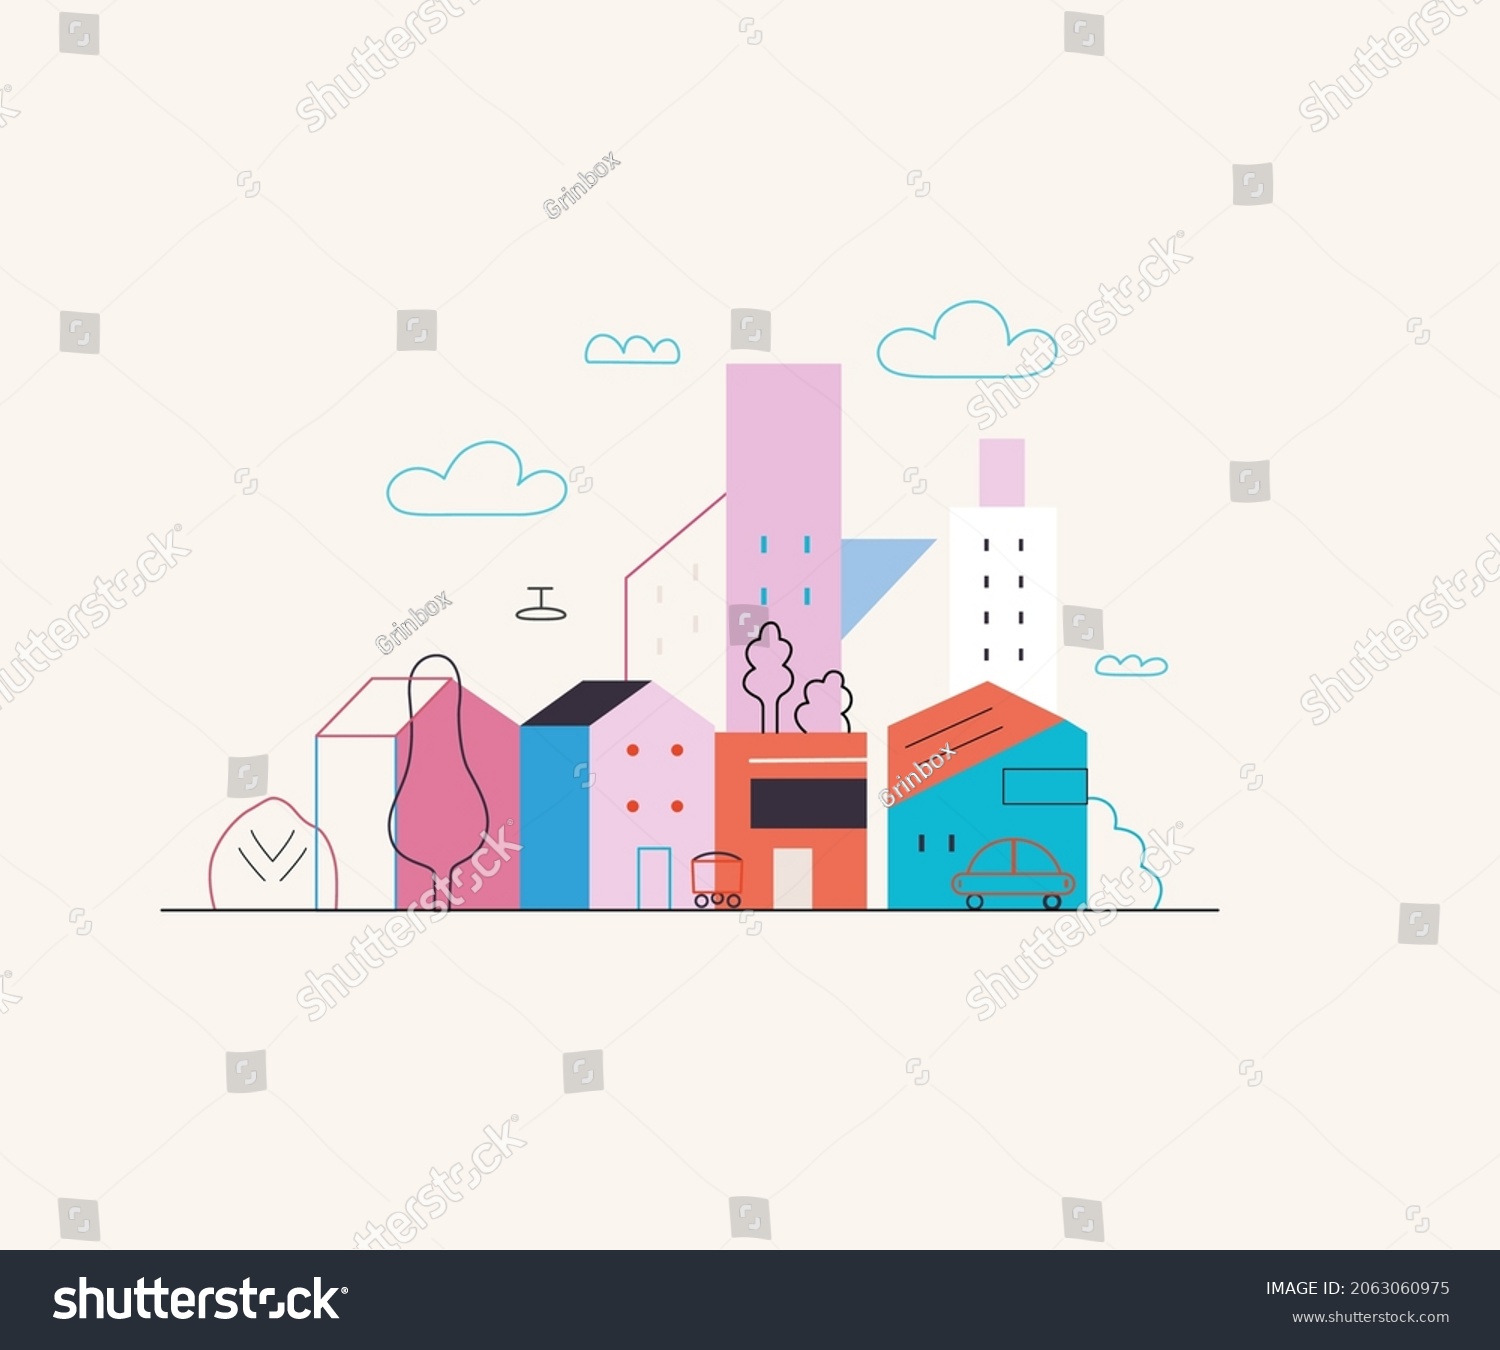 SVG of Startup illustration. Flat line vector modern concept illustration of a city, startup metaphor. Concept of building new business, planning and strategy, teamwork and management, company processes svg